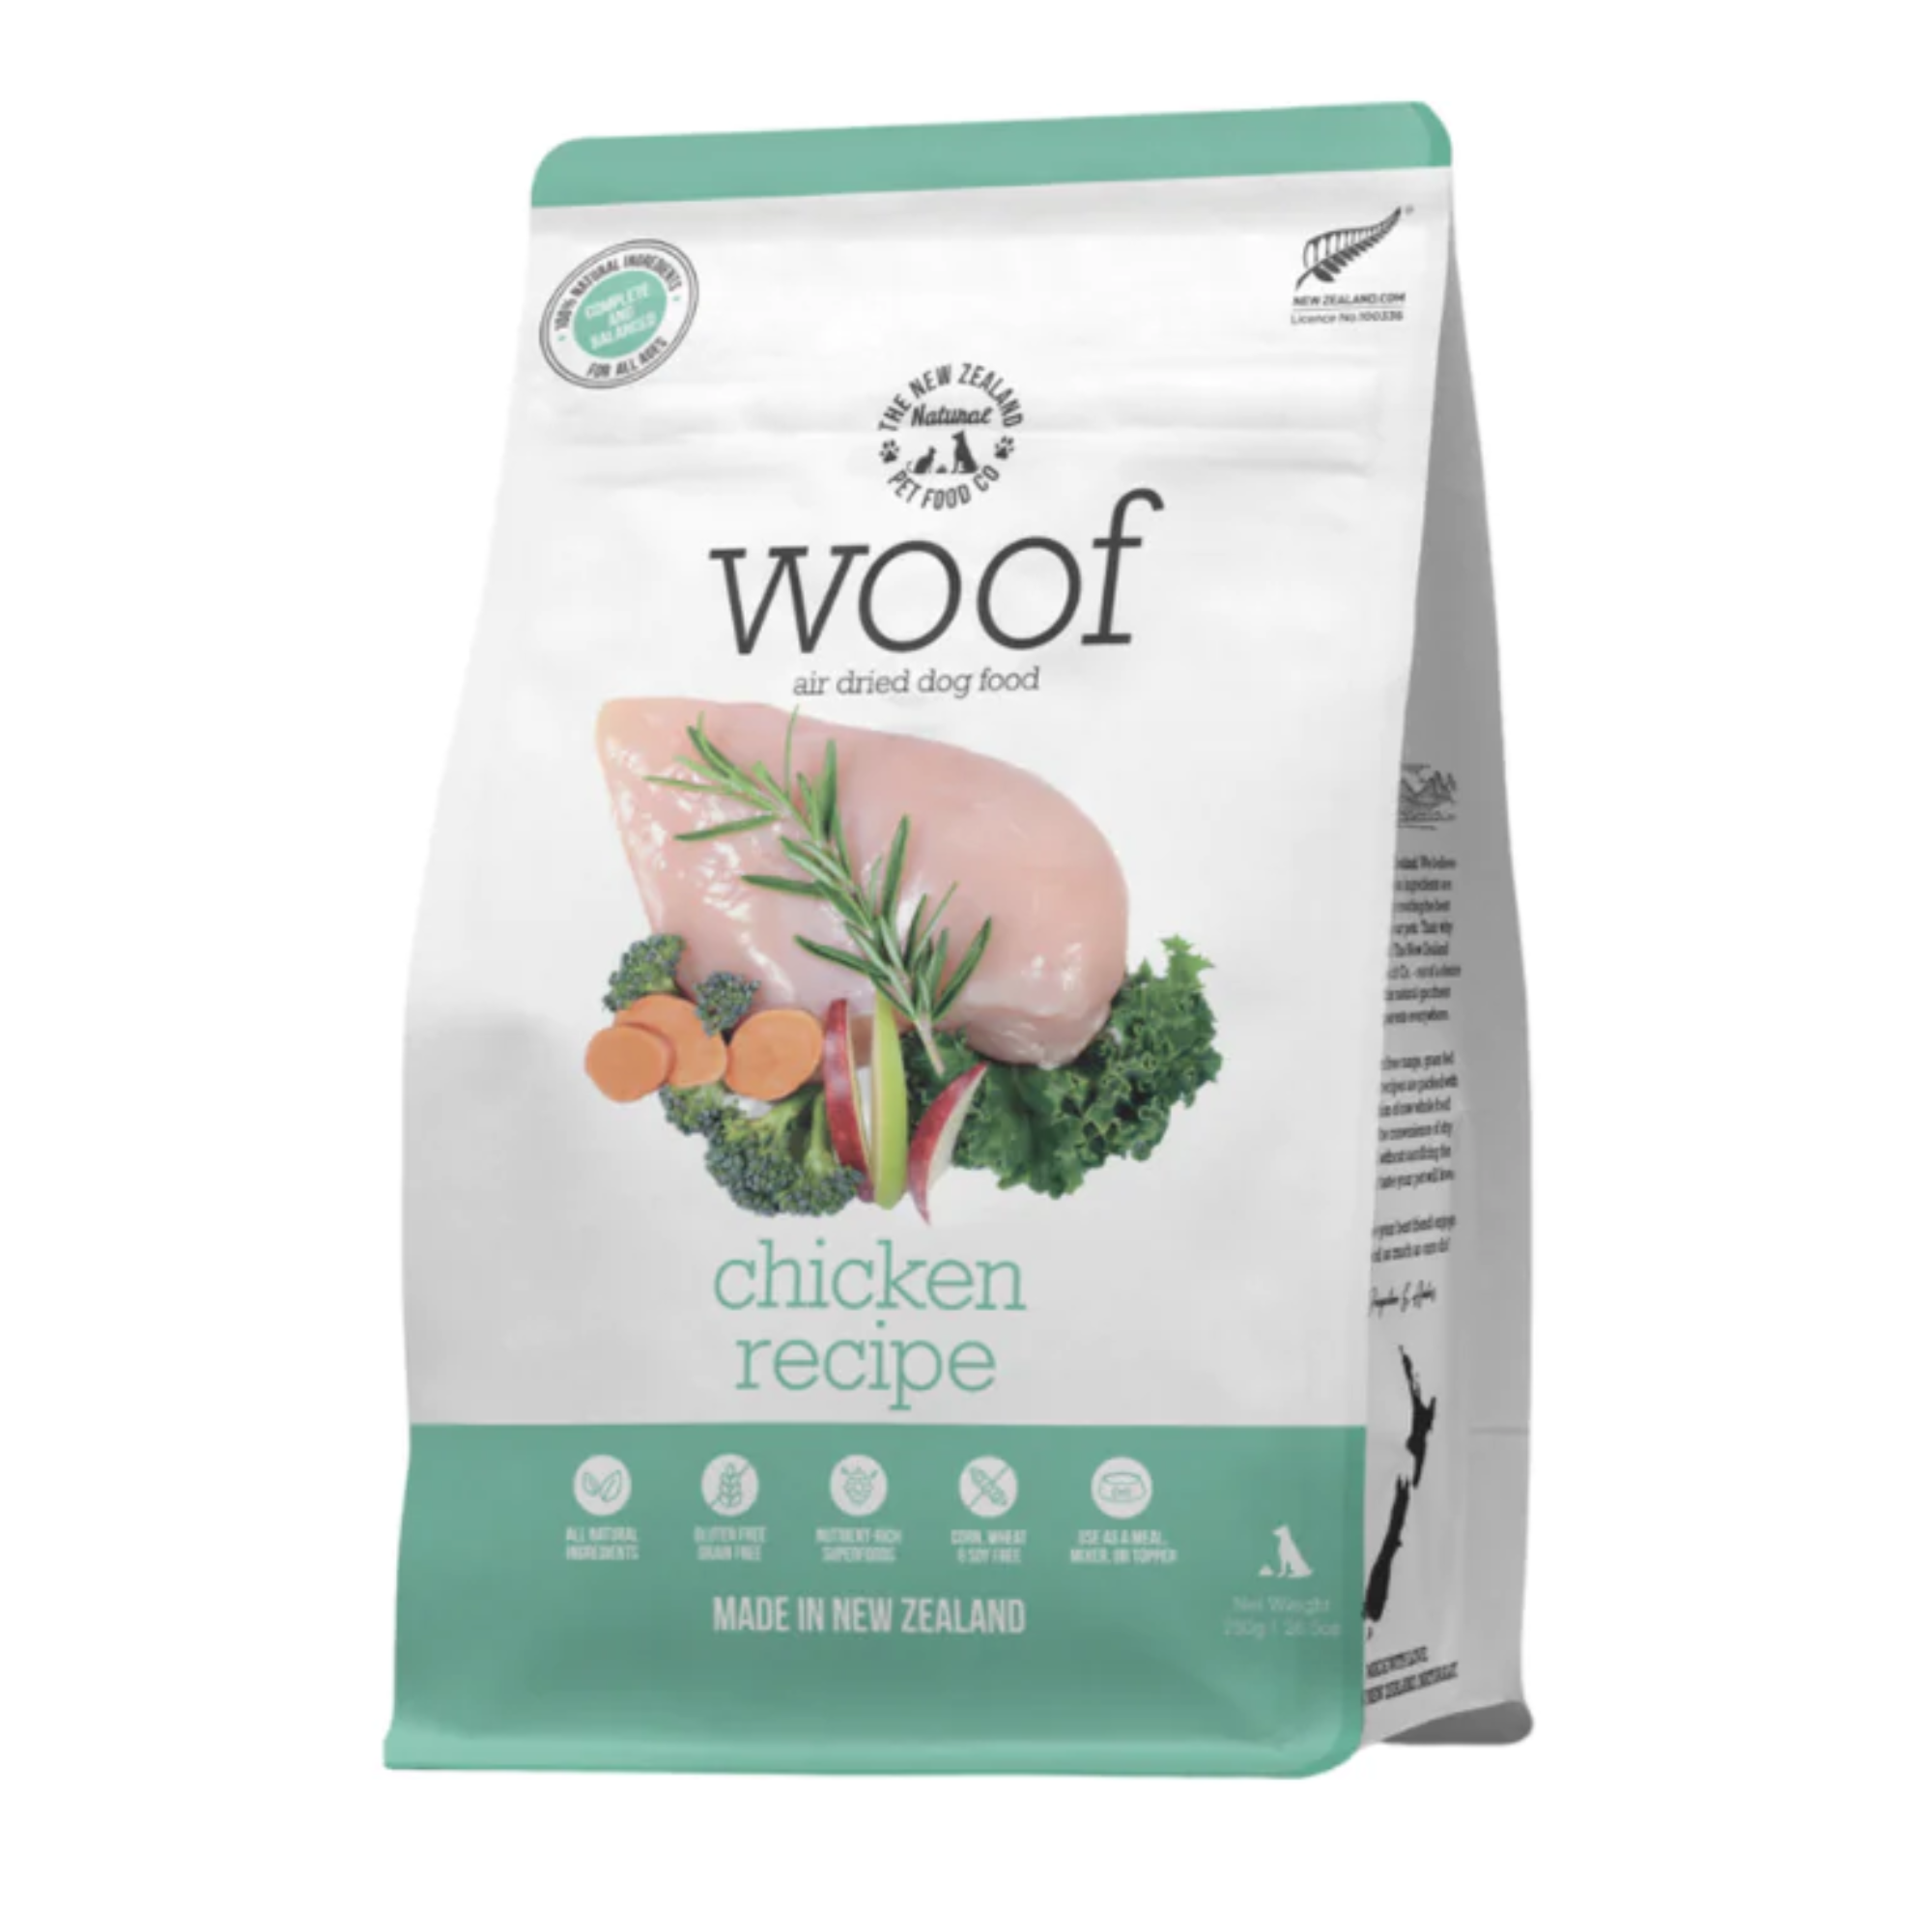 New Zealand Natural Pet Food Co. Woof Air Dried Chicken Recipe